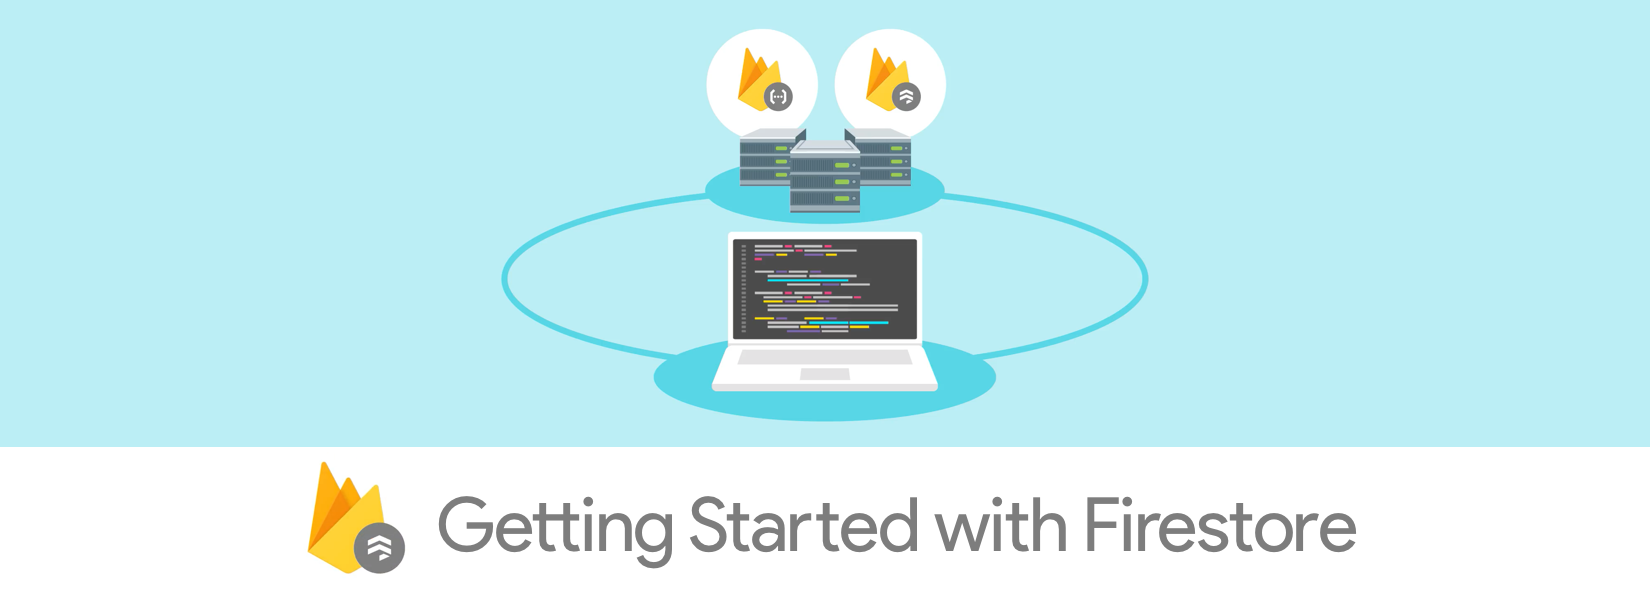 5 minute guide to deploying your first application using Firebase Firestore [How-to]